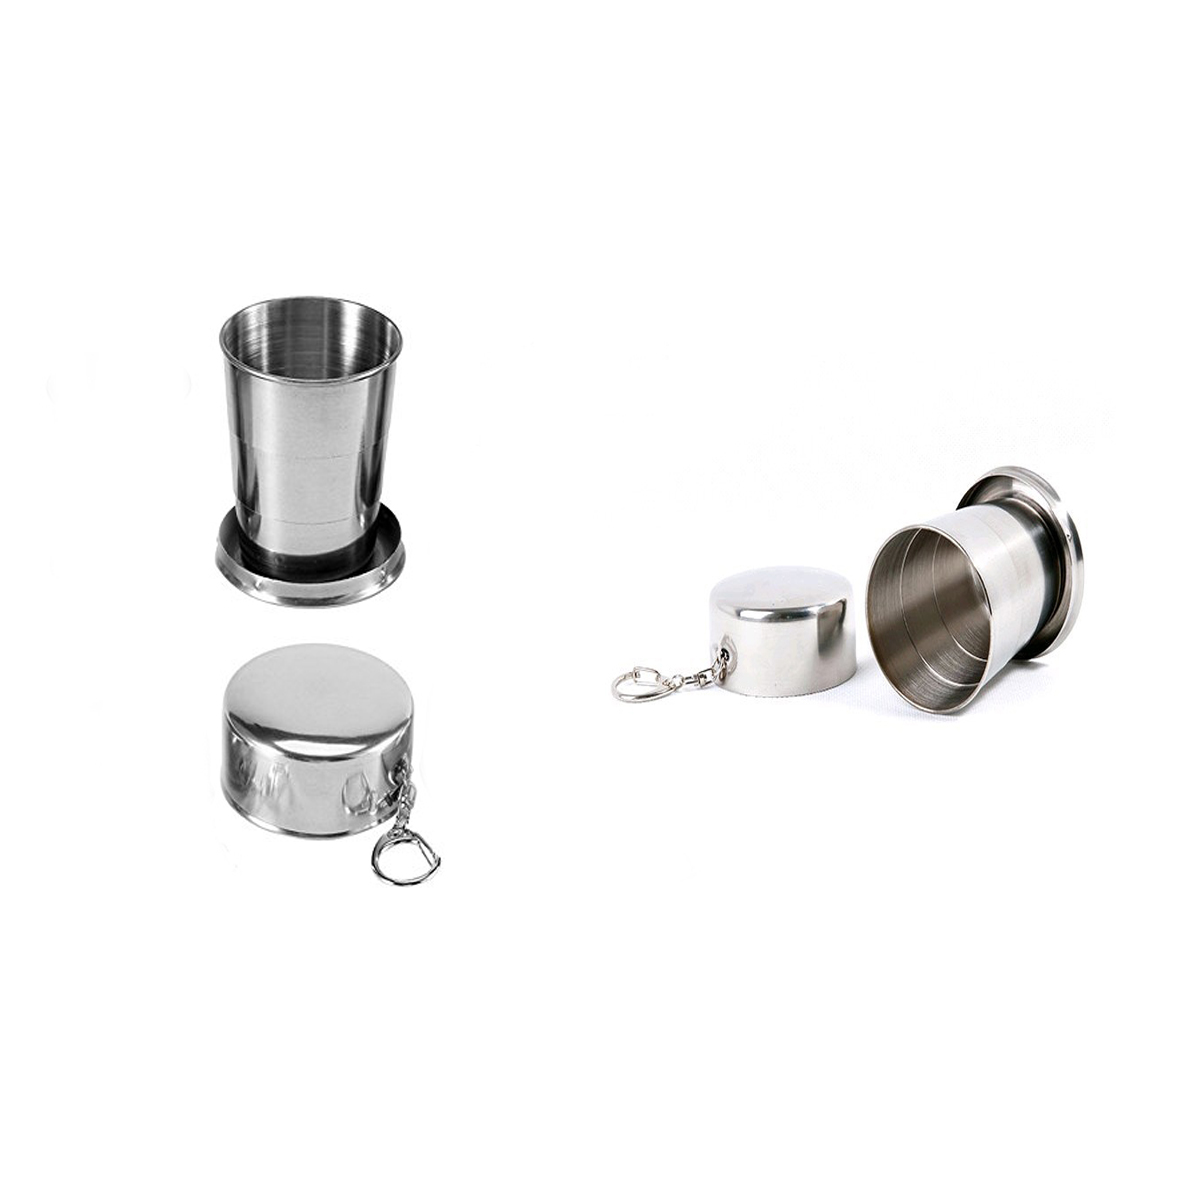 GL-AAJ1025 4.7oz Stainless Steel Retractable Cup with Keychain